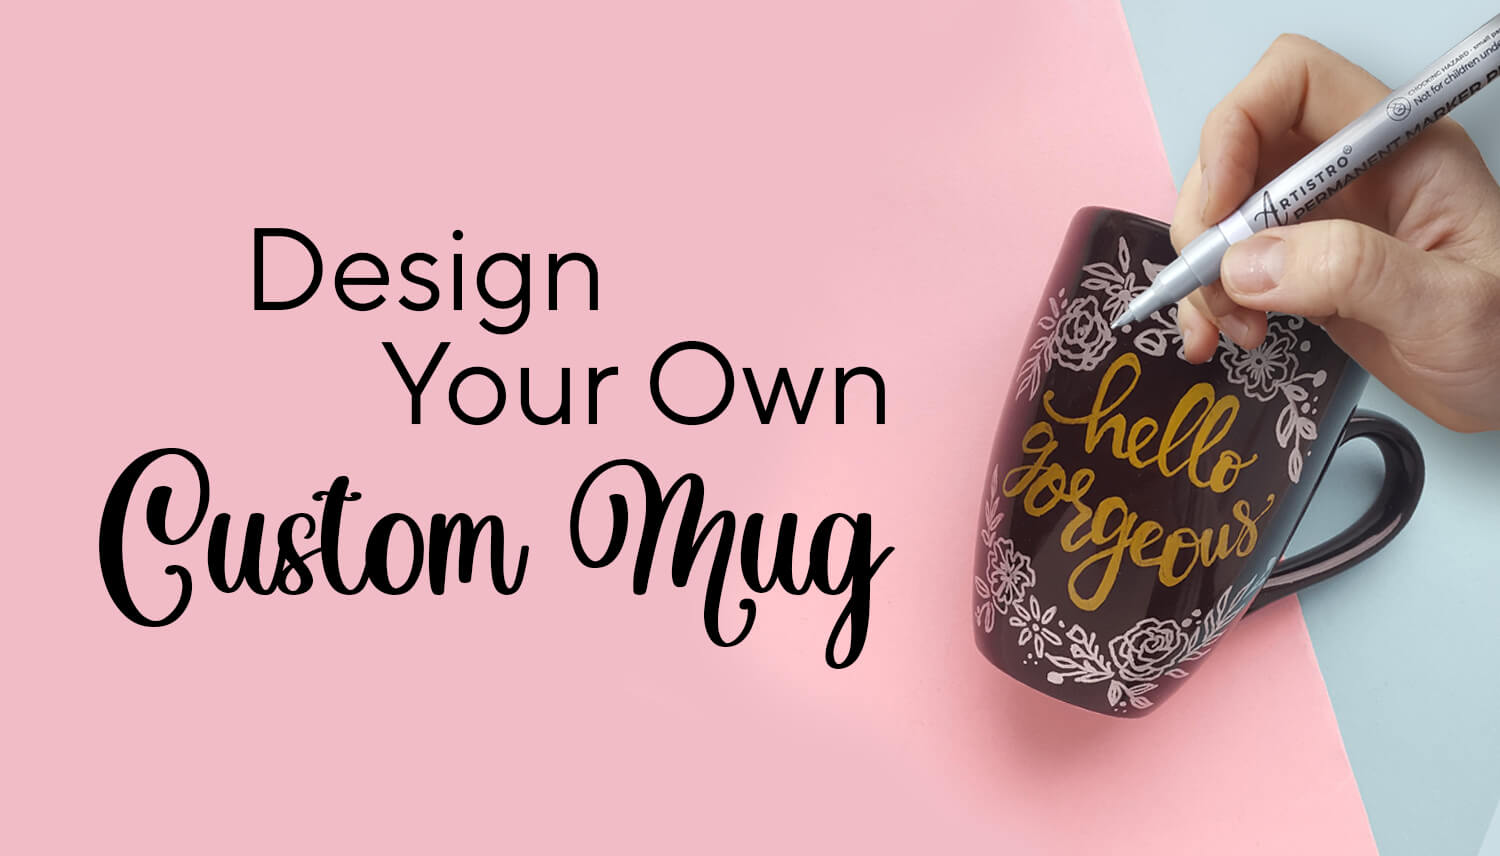 Personalized Coffee Thermos and Mug Ideas